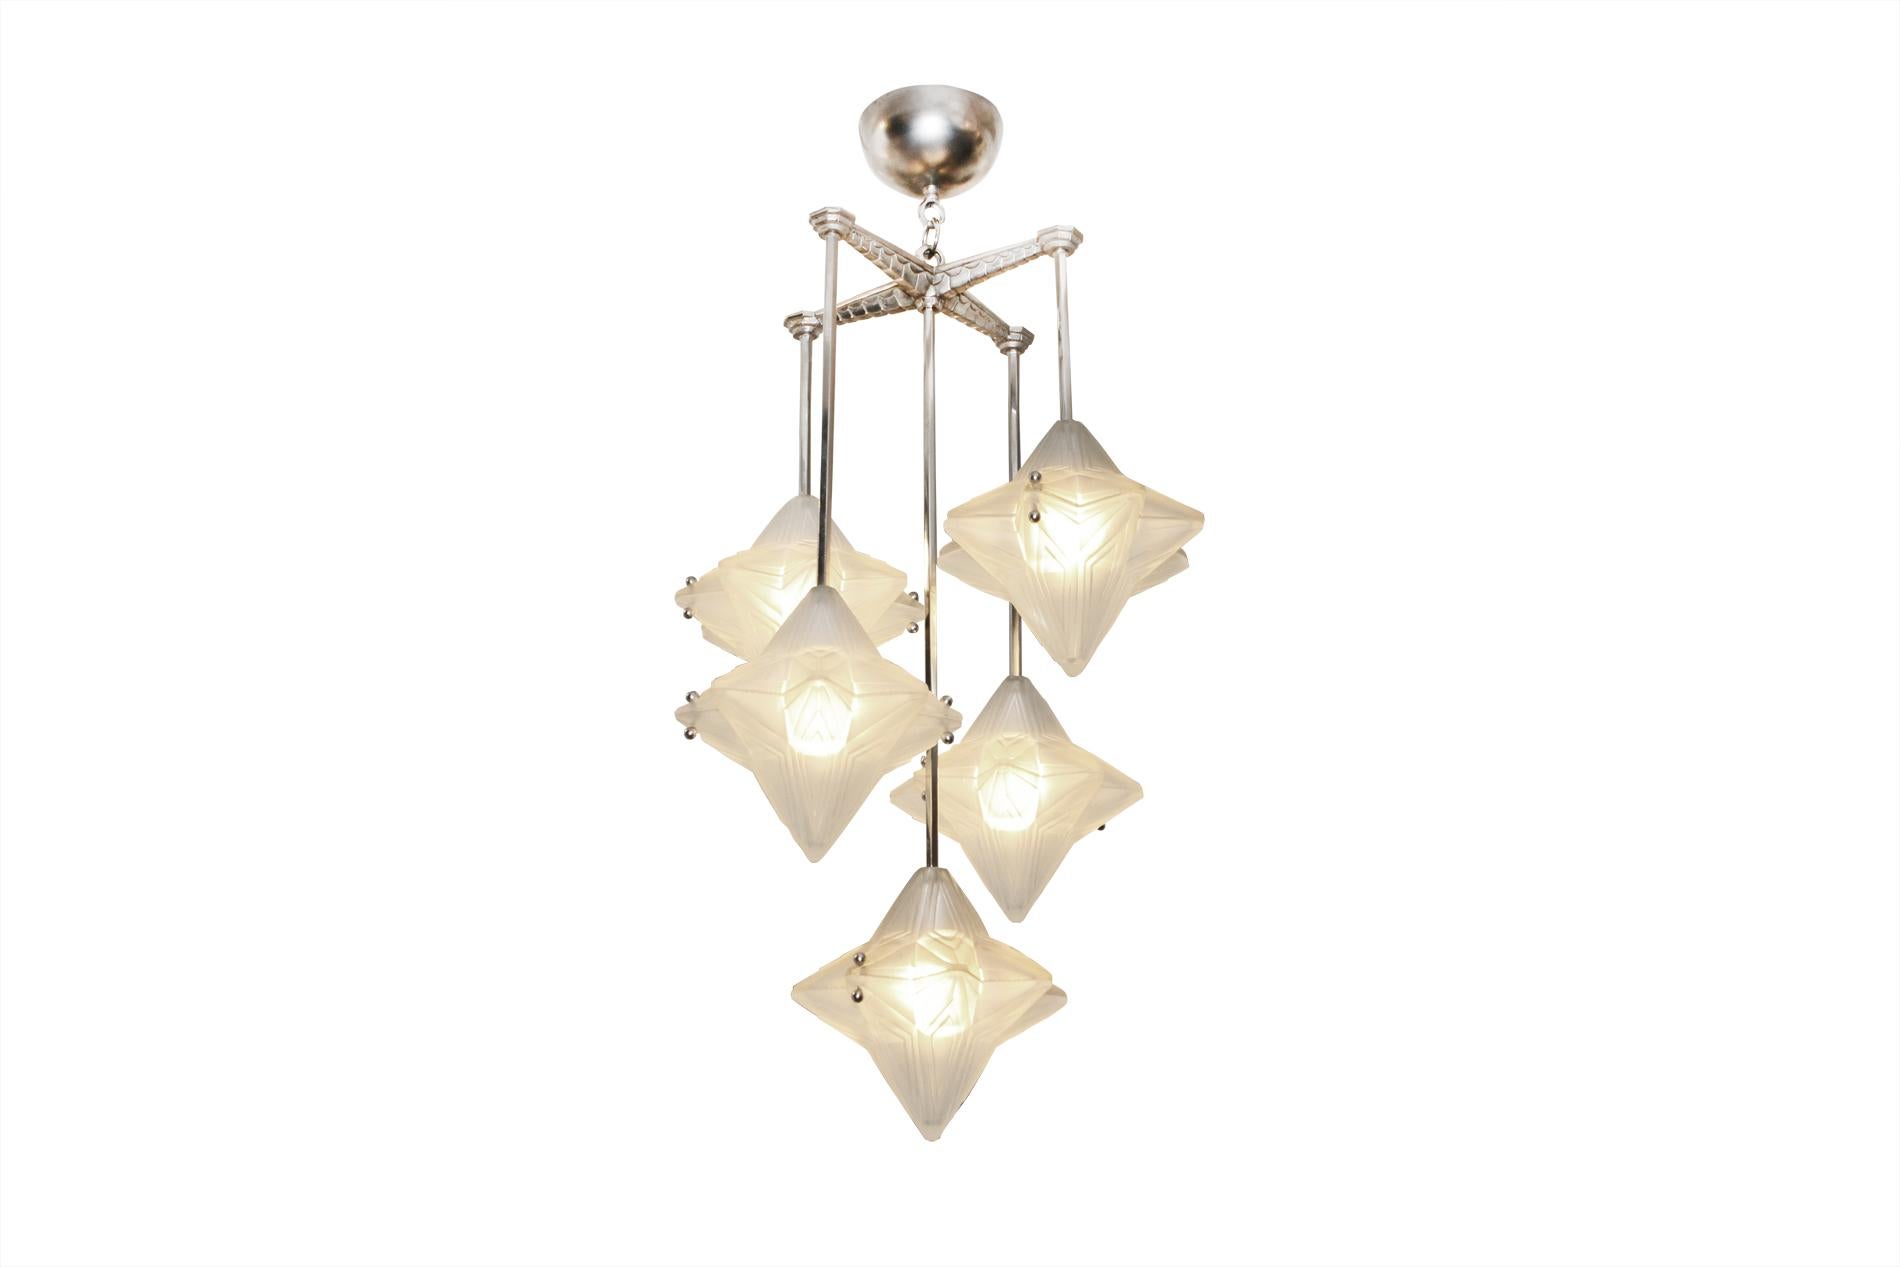 French Art Deco chandelier by Genet & Michon circa 1930  with 5 lights at different levels - Each light cover, made of two identical parts of pressed moulded glass, evokes a falling flower - Nickel-plated bronze. 